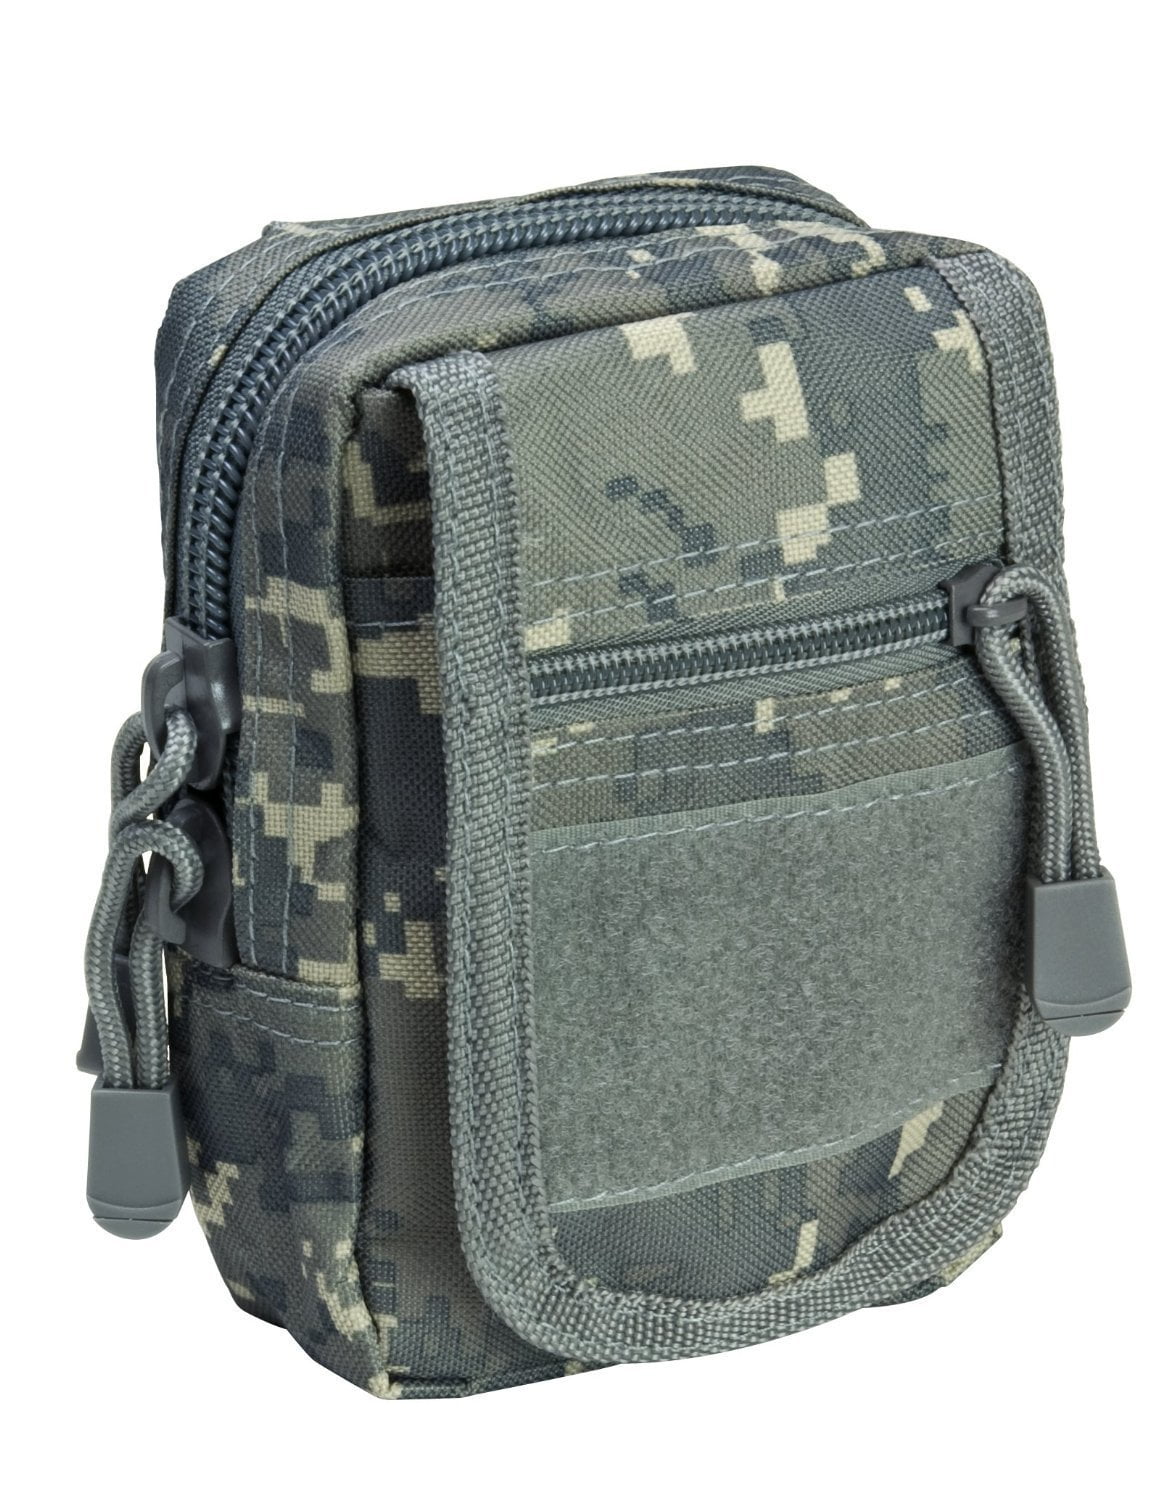 NcStar VISM ACU Large Utility Cell Phone GPS EMT First Aid MOLLE PALS Pouch 